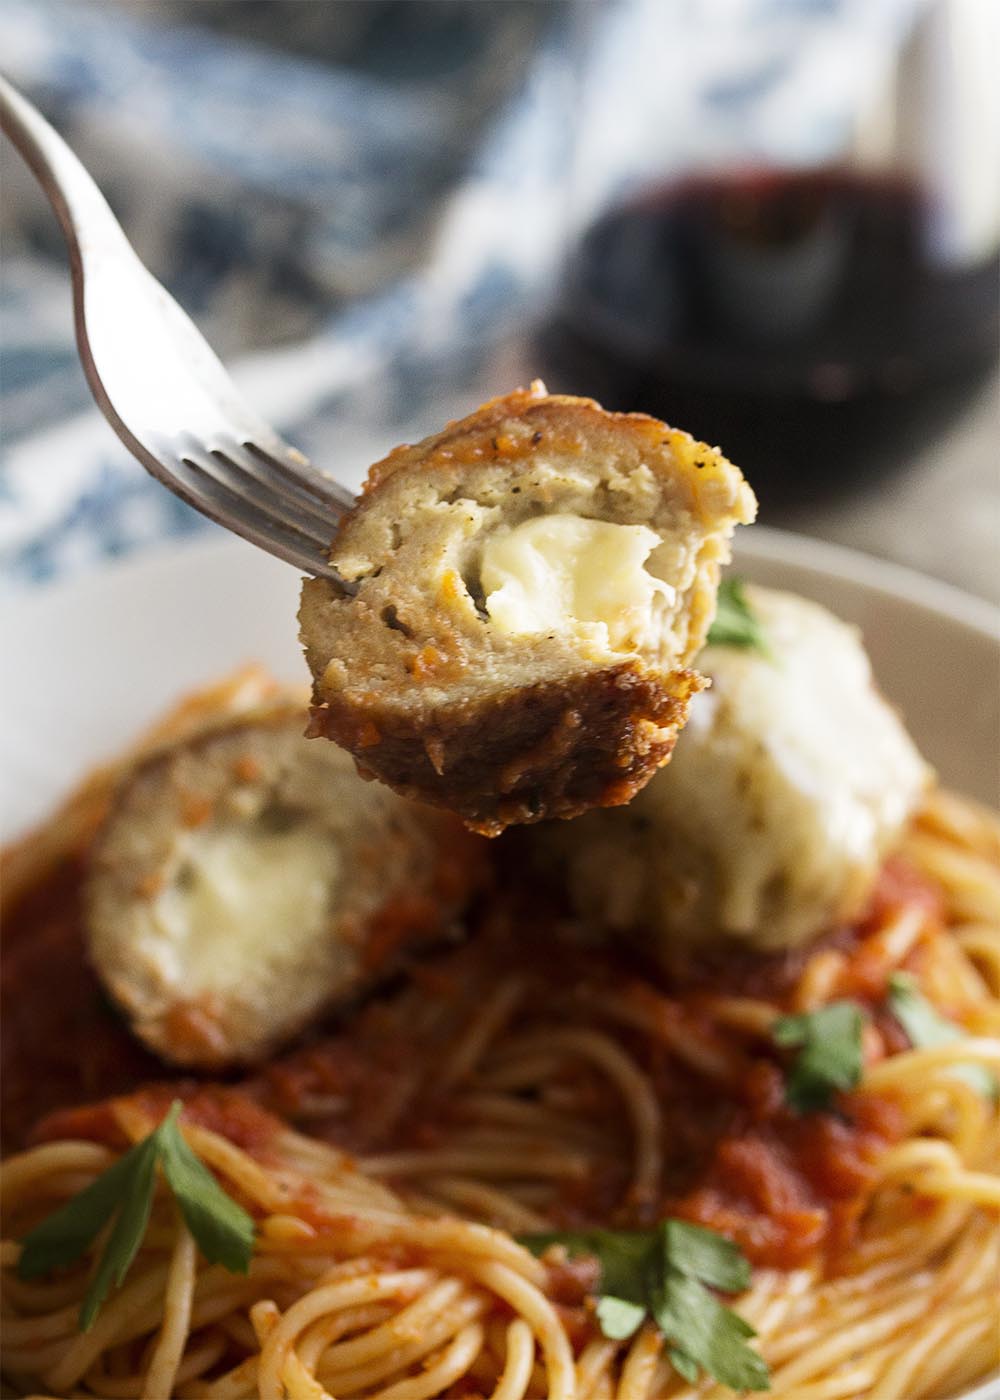 Crispy, mozzarella stuffed and juicy! These chicken parmesan meatballs are full of gooey mozzarella and rolled in breadcrumbs to make a crispy crust. Serve with marinara sauce and pasta. | justalittlebitofbacon.com